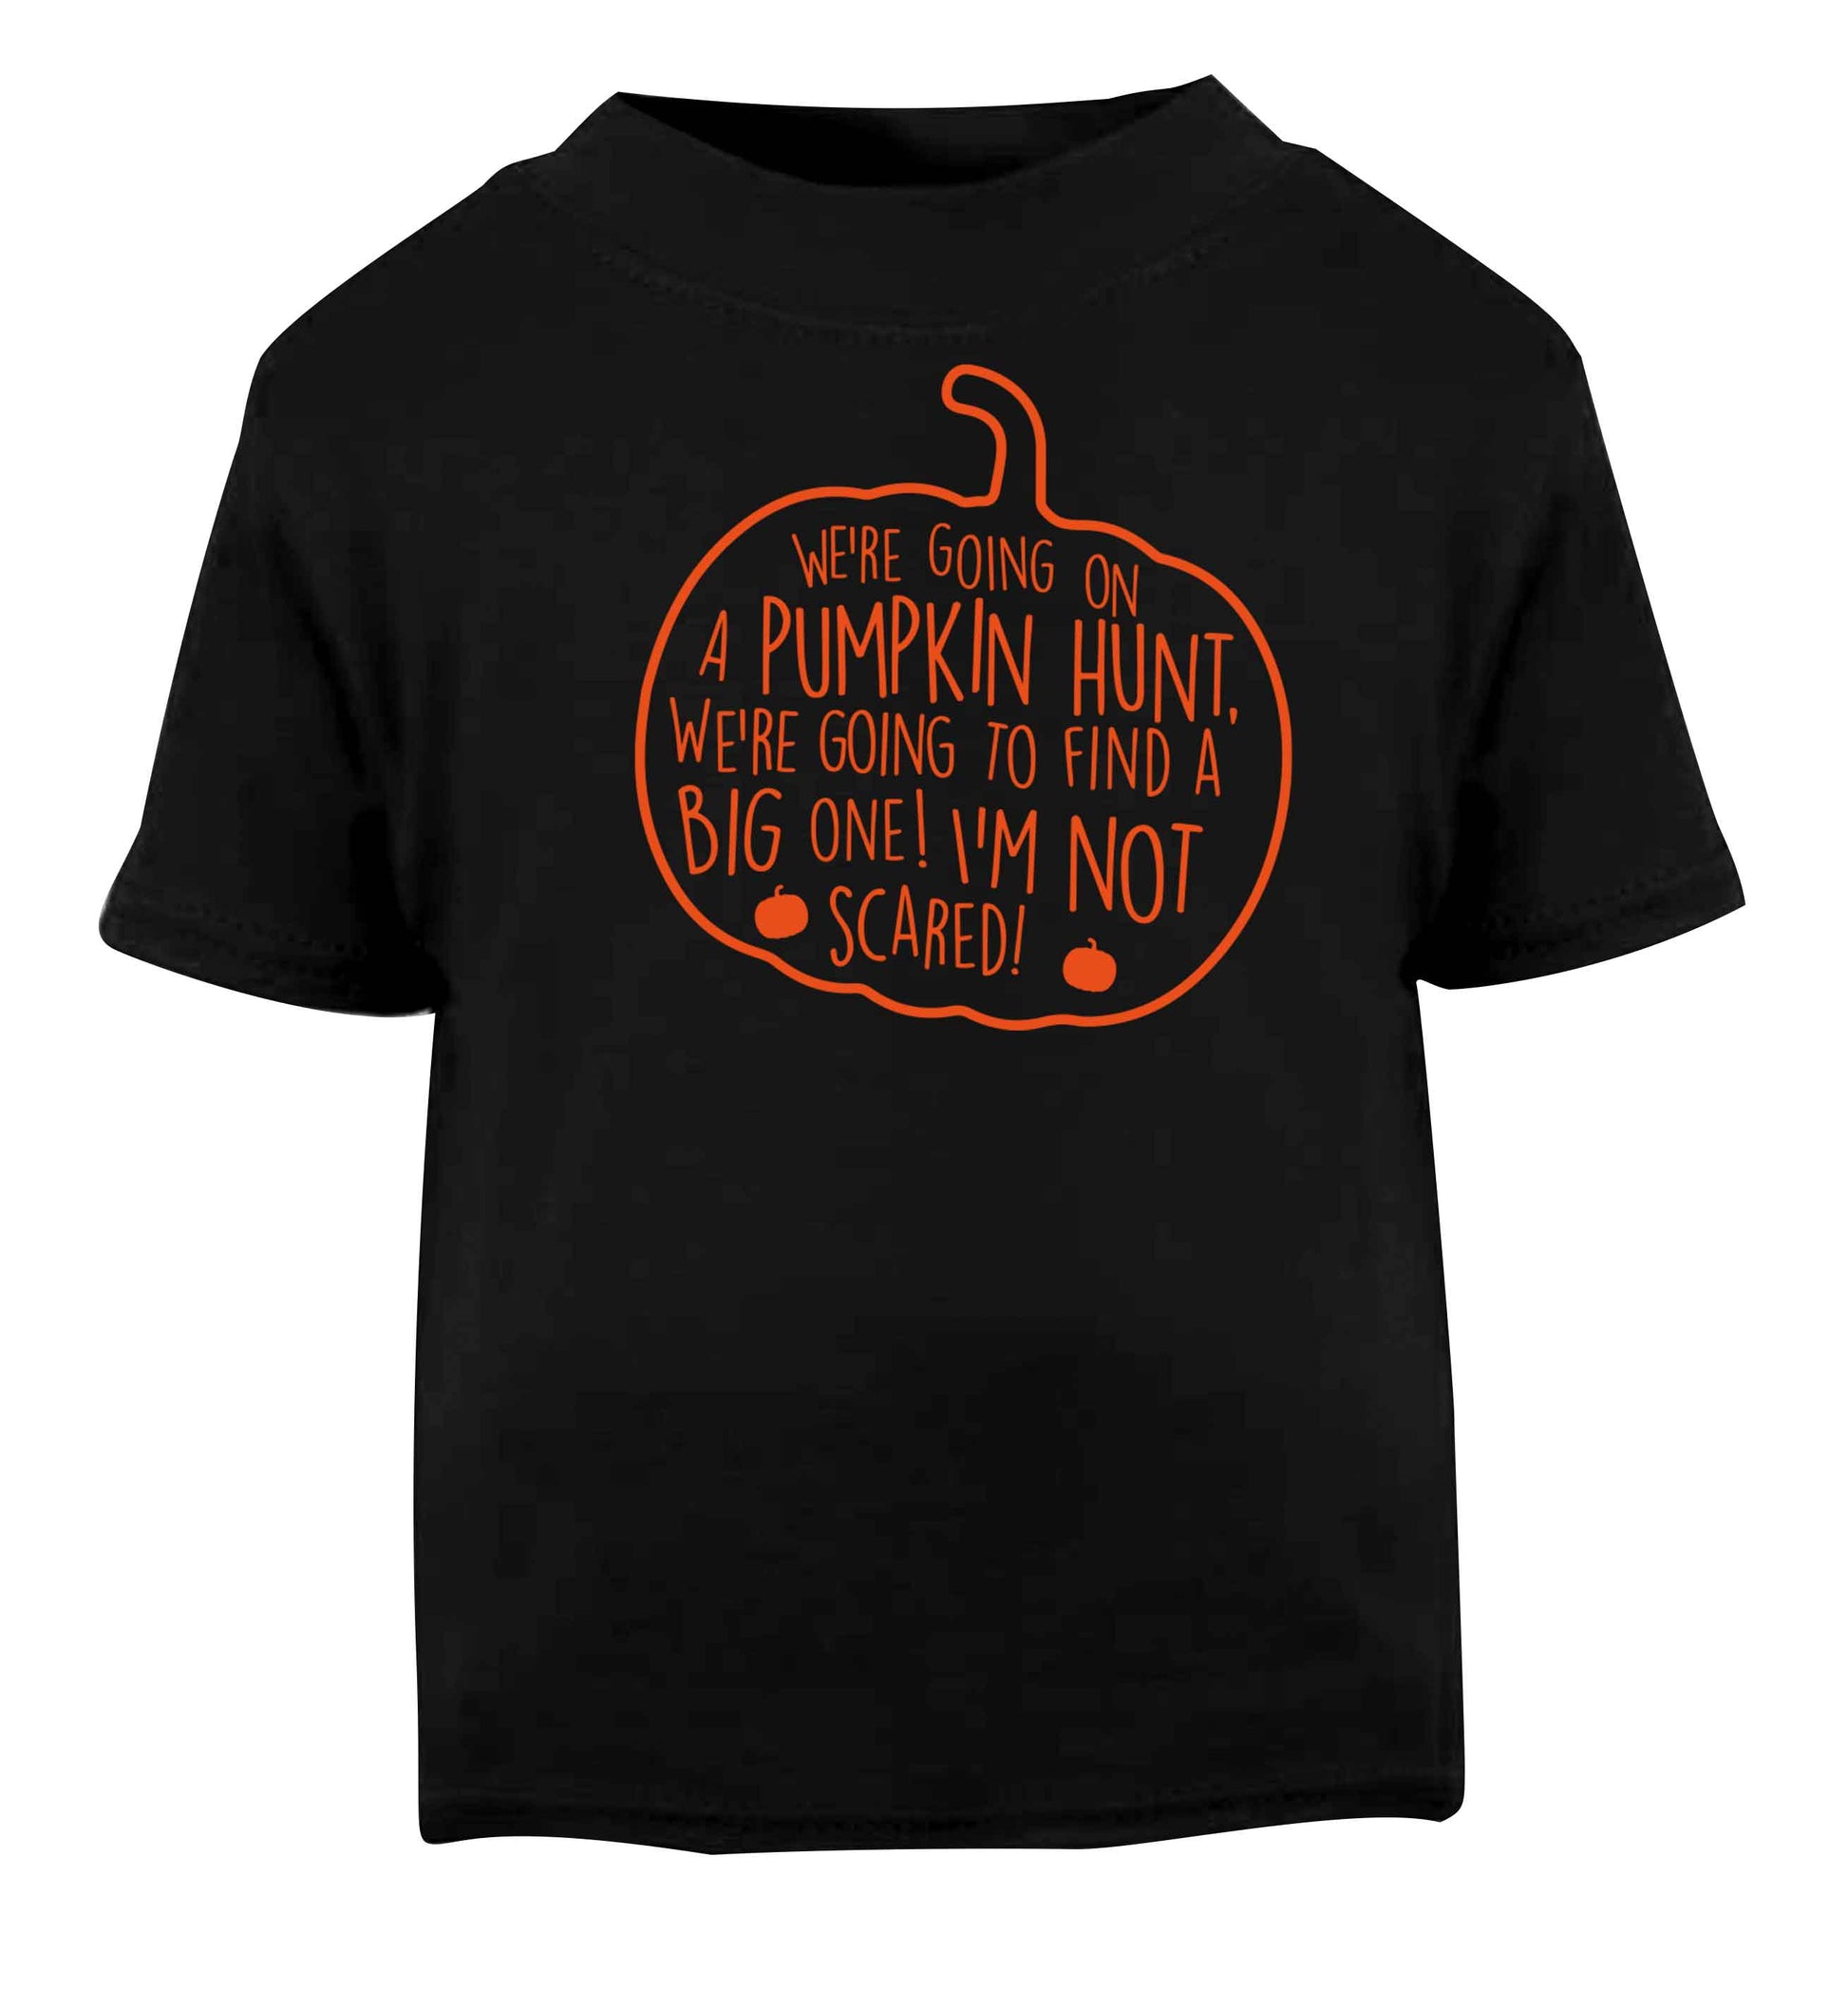 We're going on a pumpkin hunt Black baby toddler Tshirt 2 years